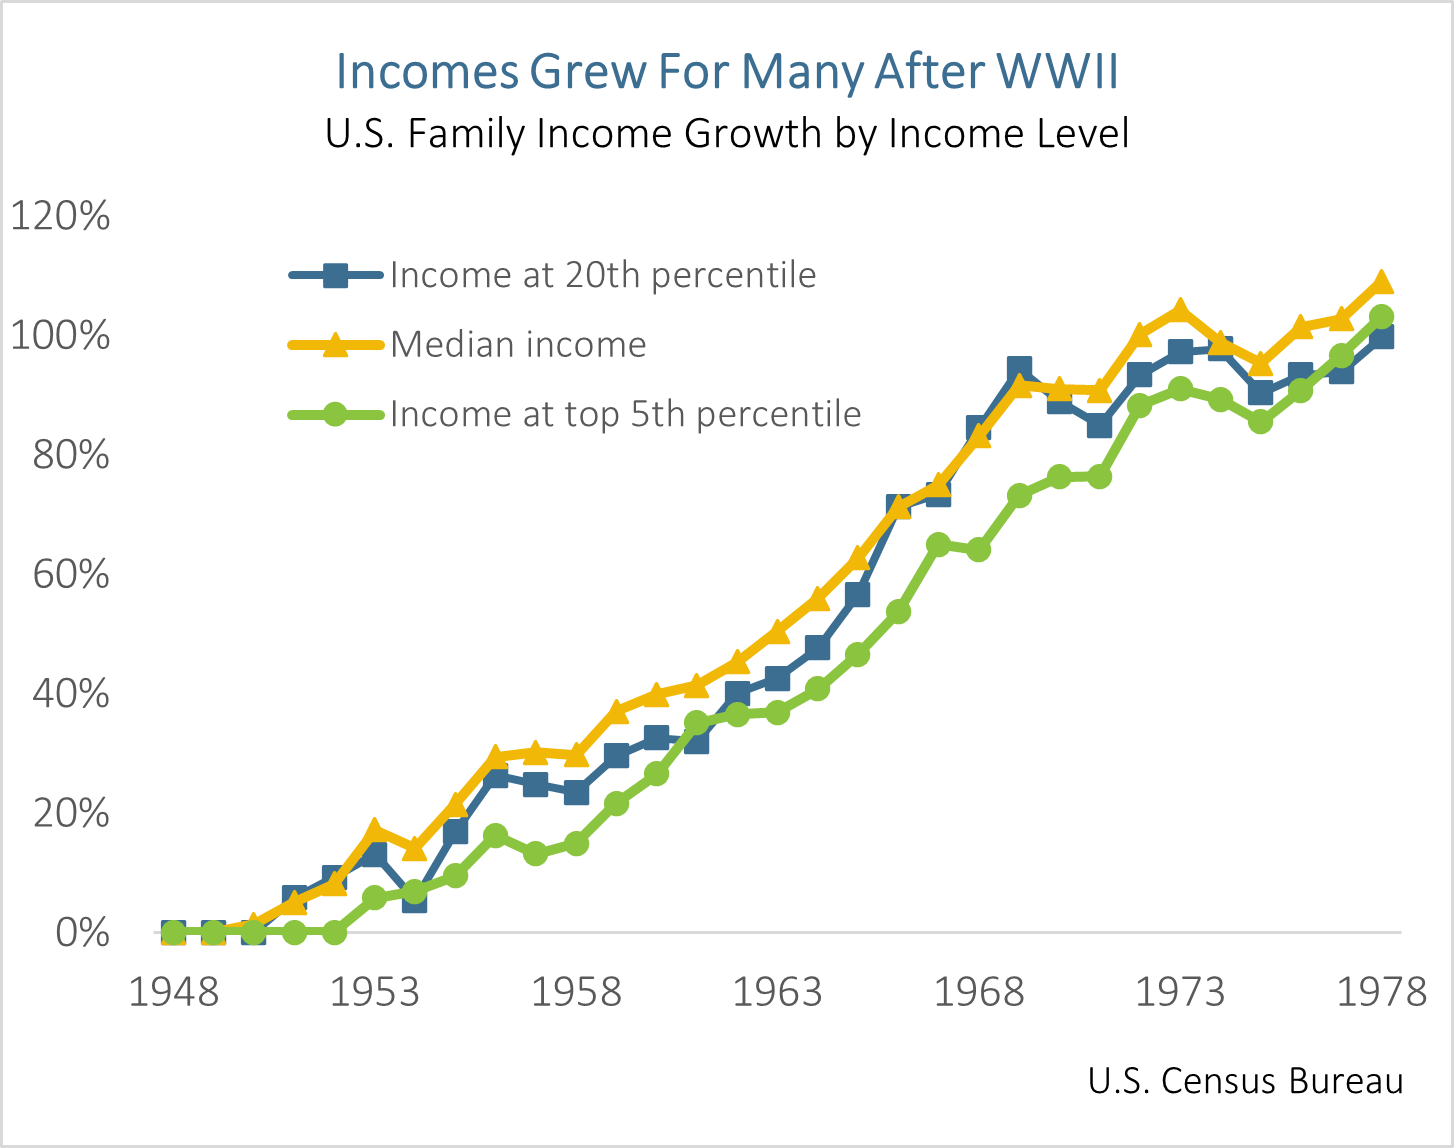 Incomes grew for many after world war 2